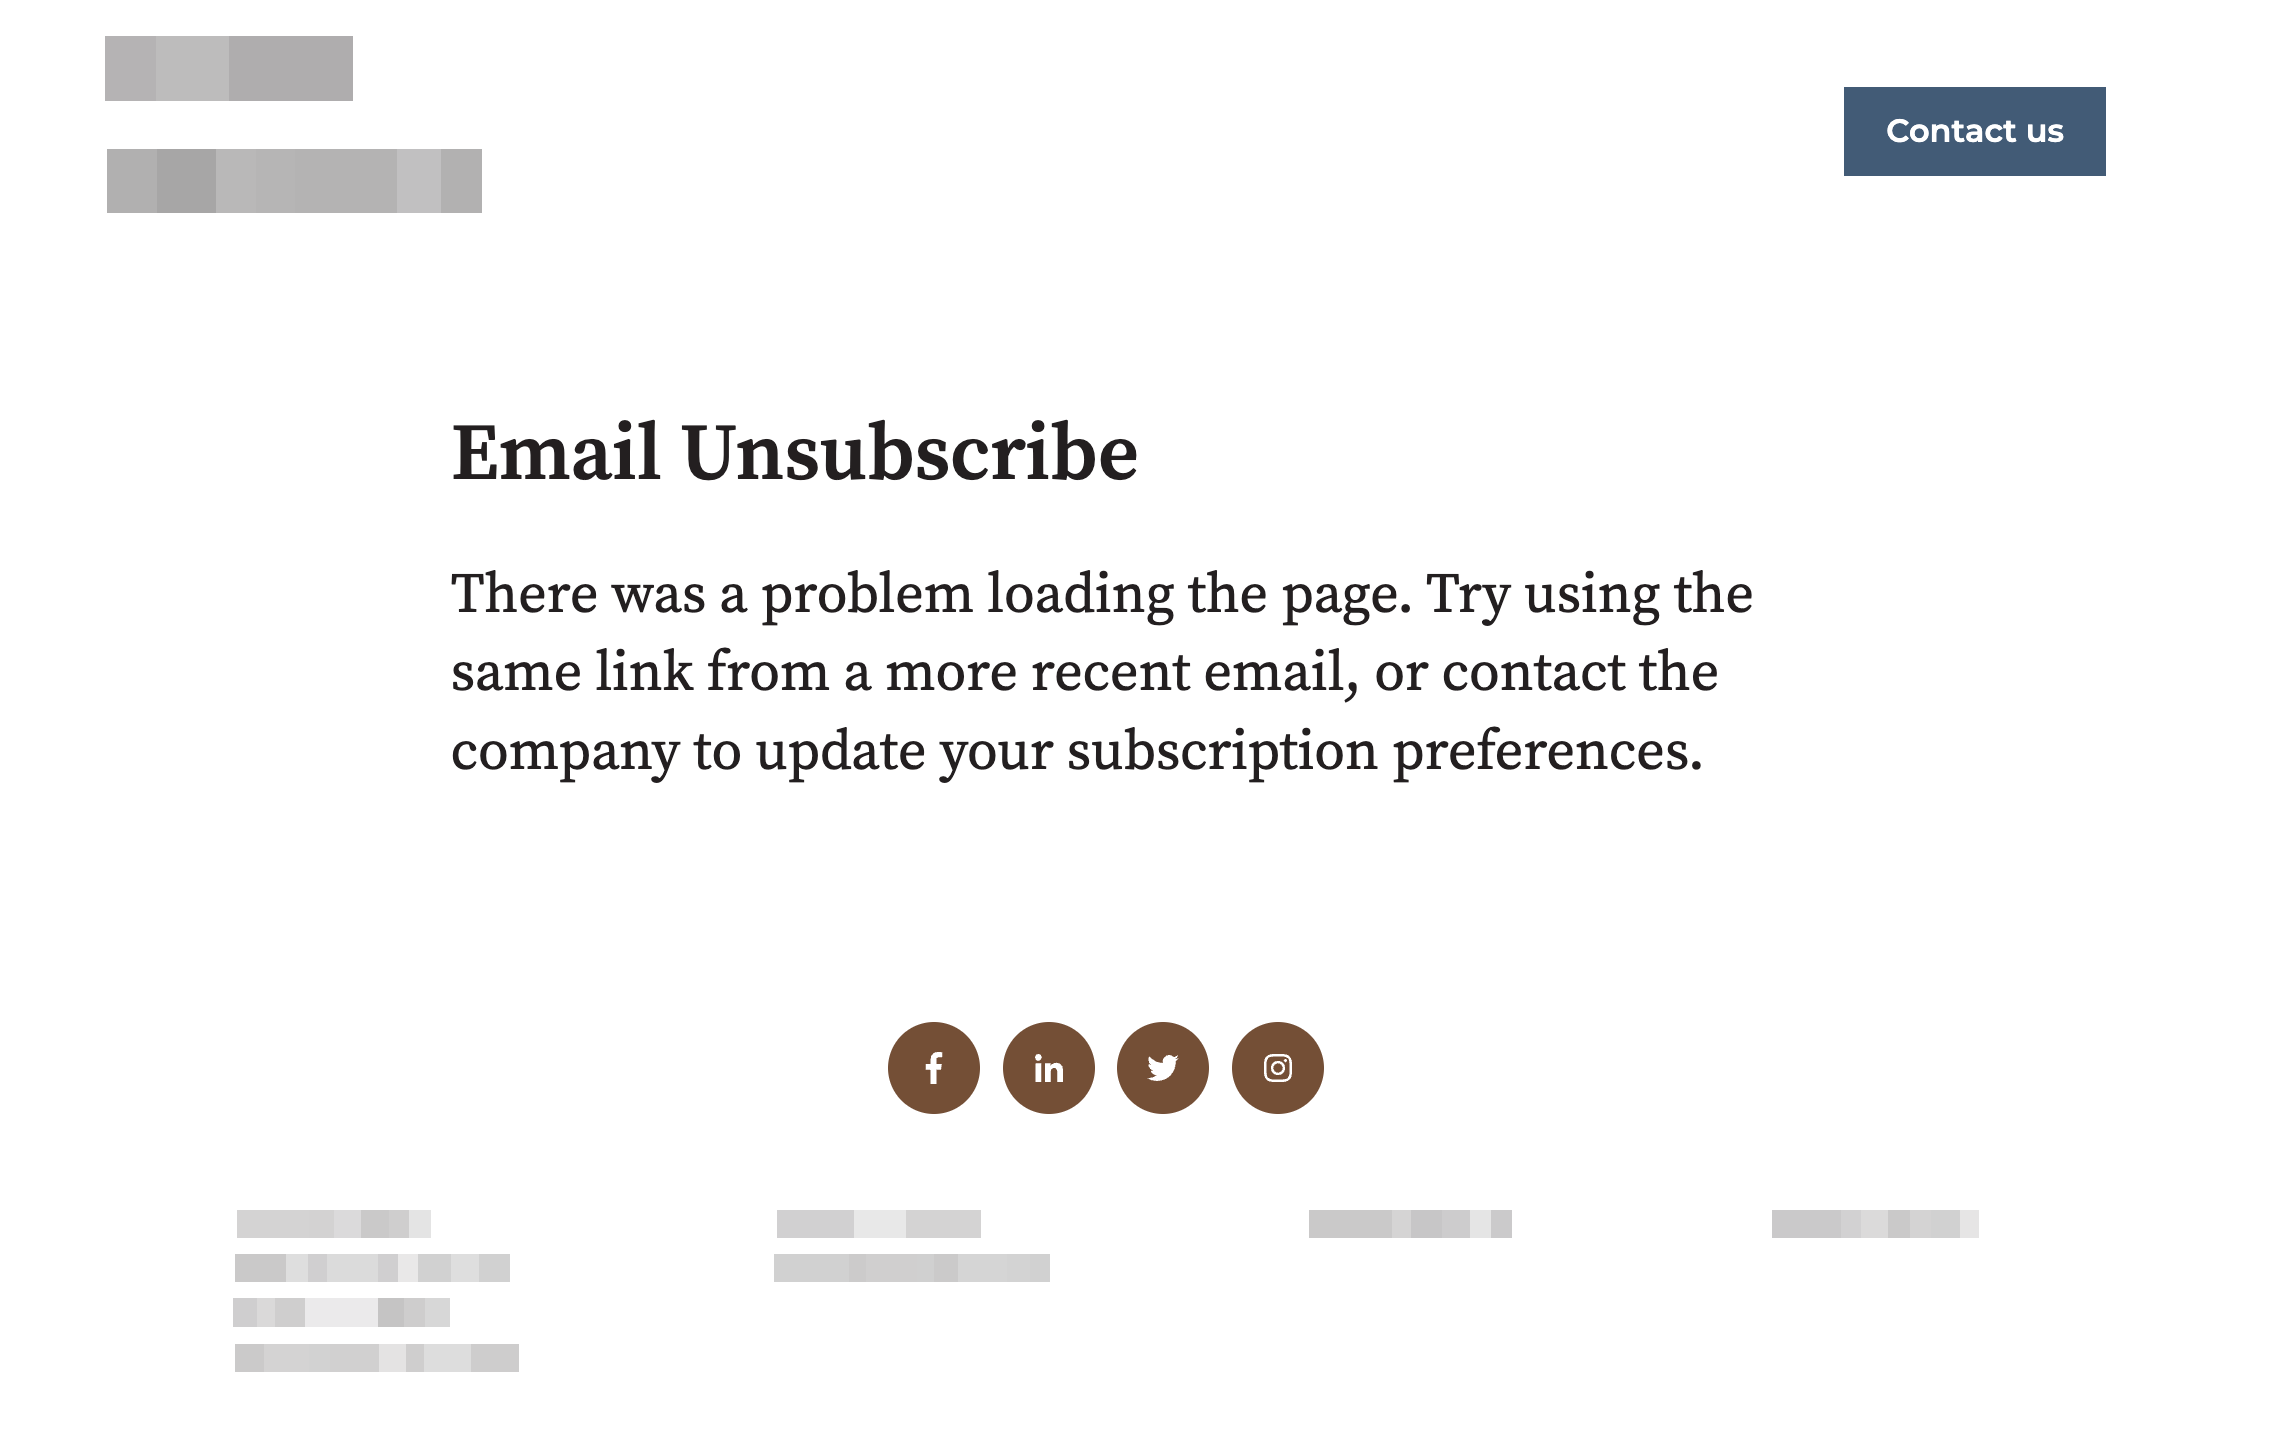 Showing updated messaging for users who navigate to the unsubscribe page directly